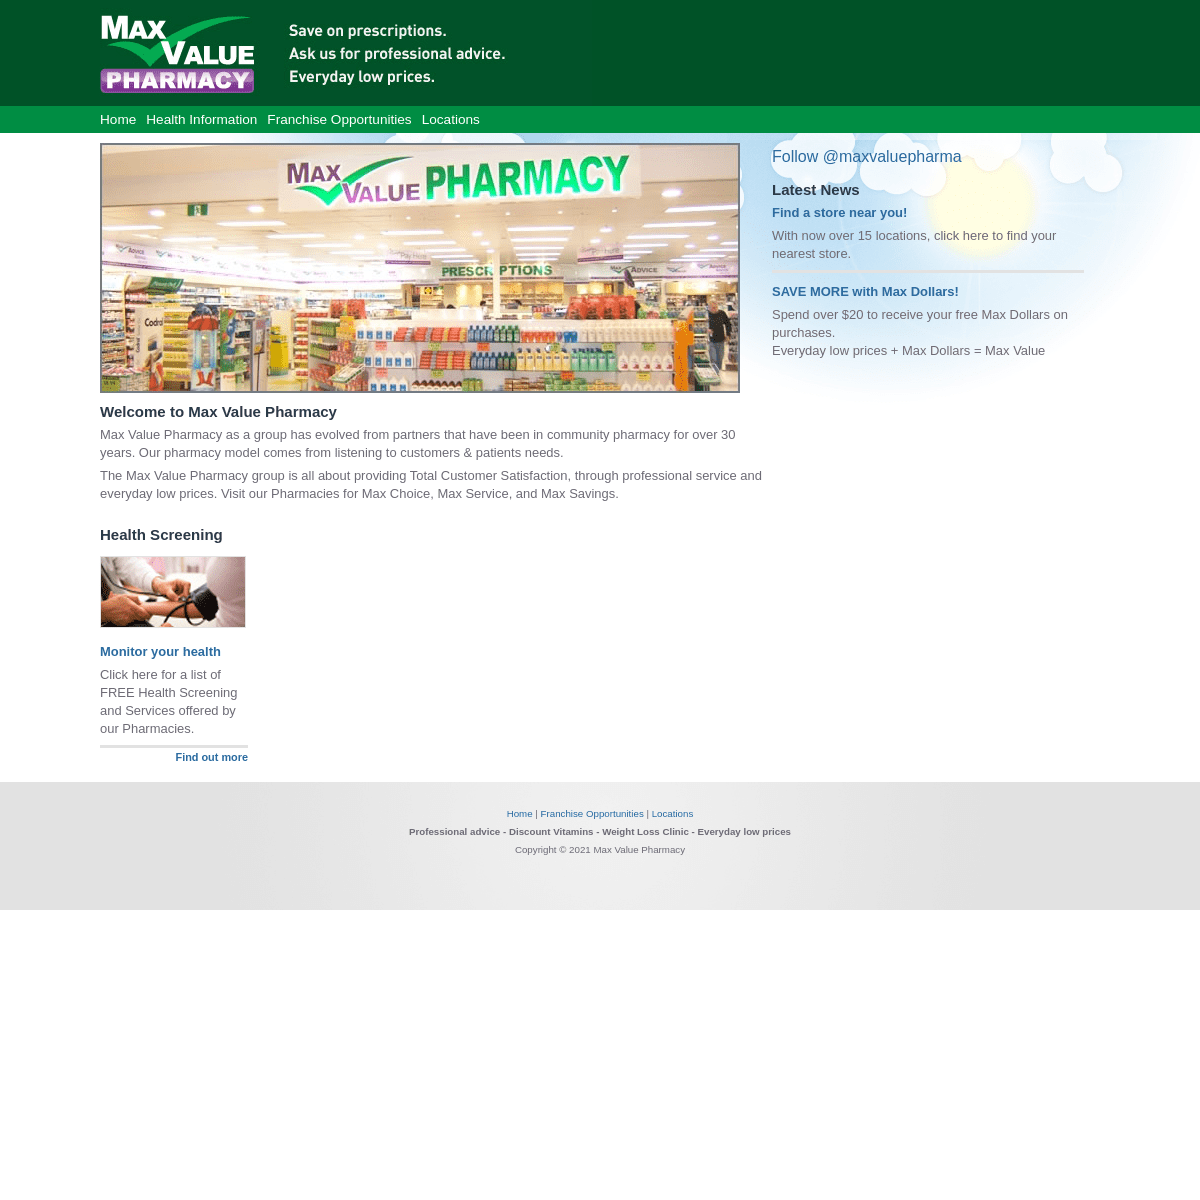 A complete backup of https://maxvaluepharmacy.com